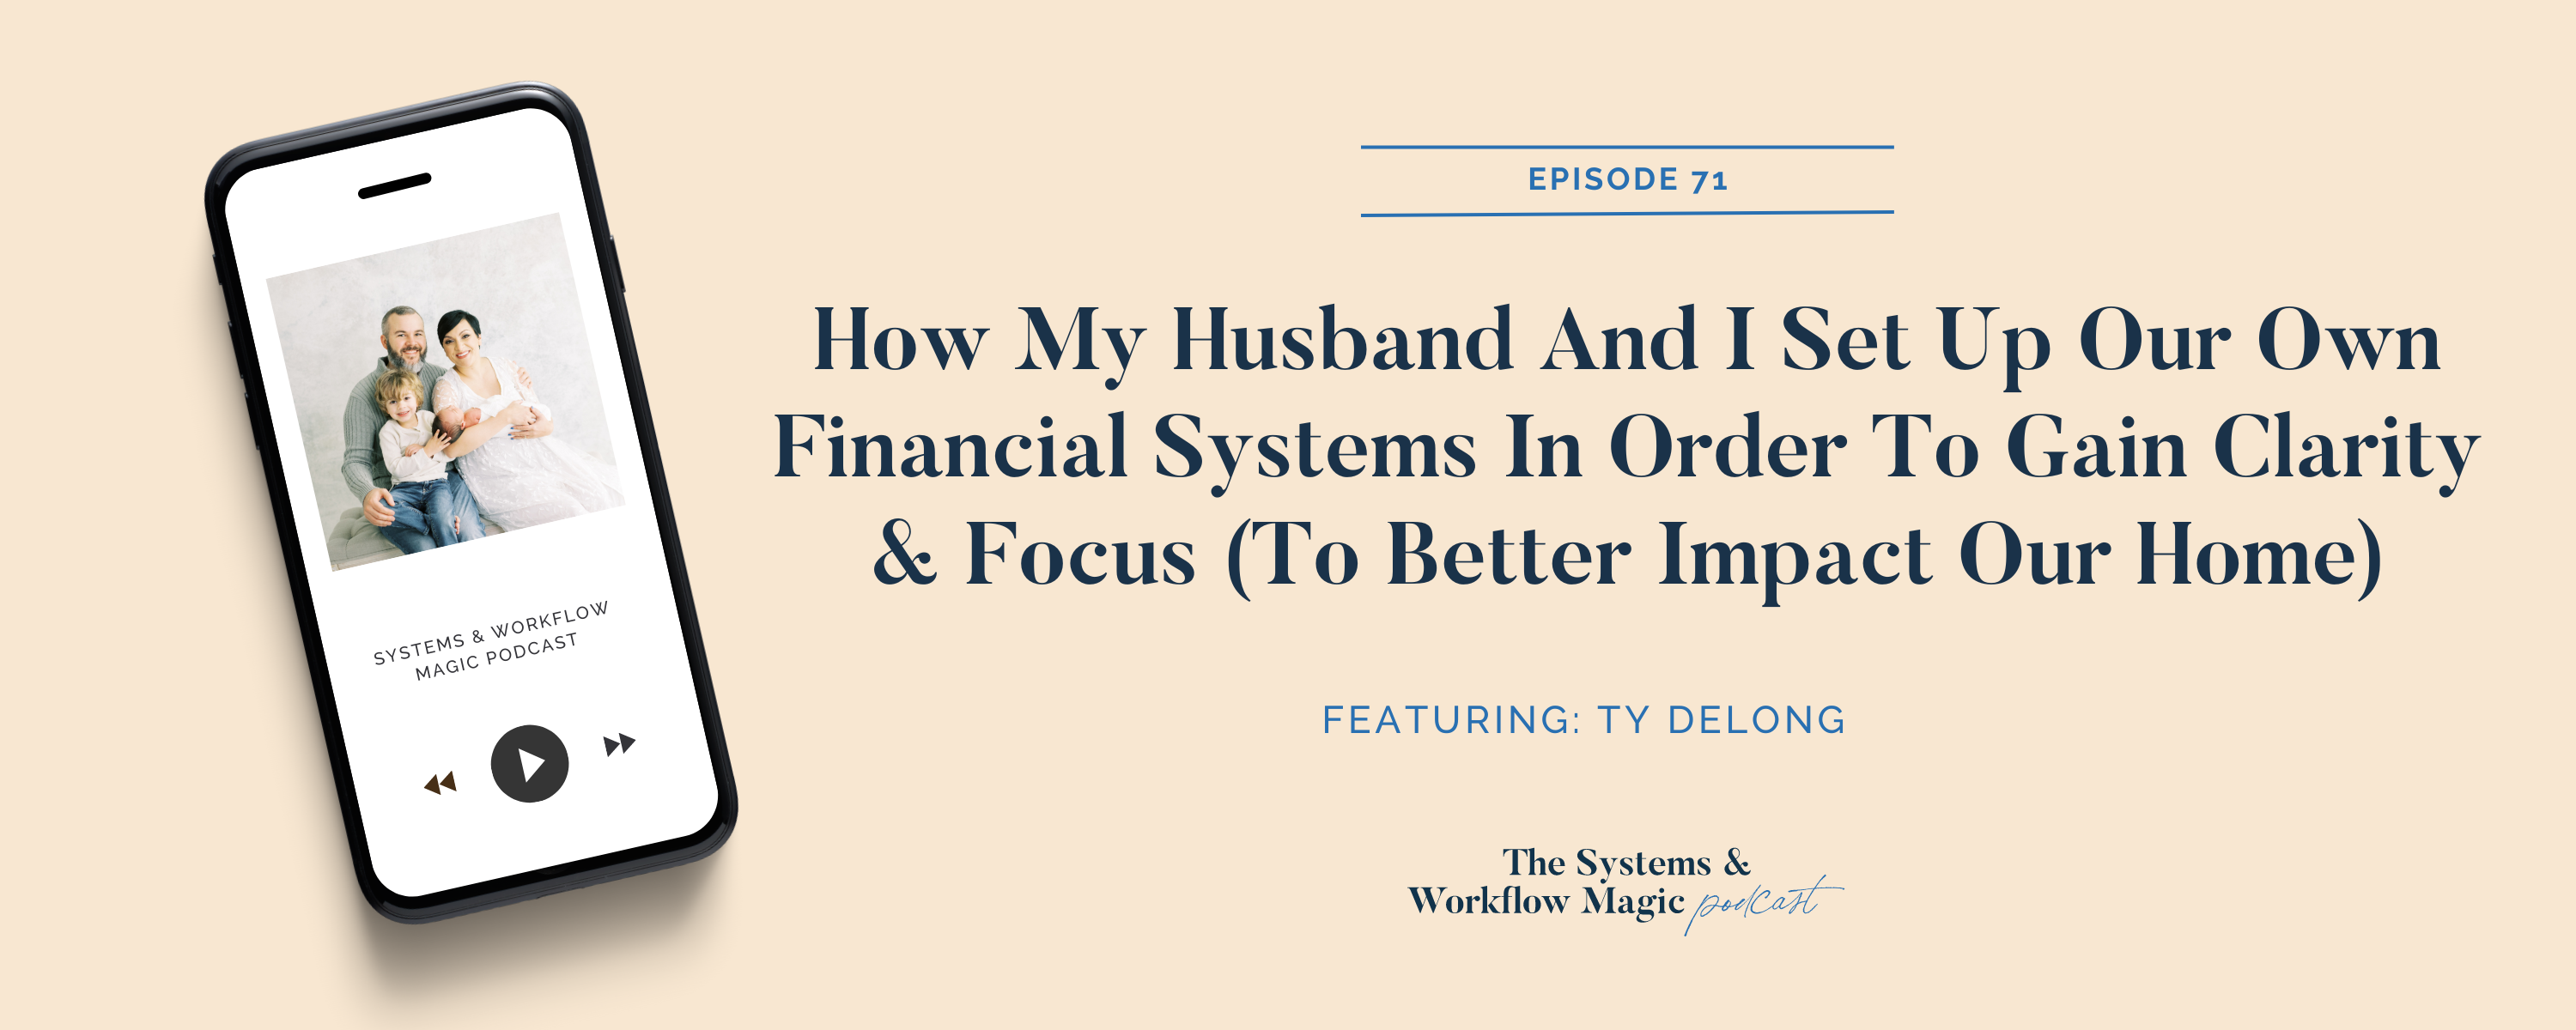 71-how-setting-up-financial-systems-in-your-marriage-creates-peace-clarity-featuring-ty-delong